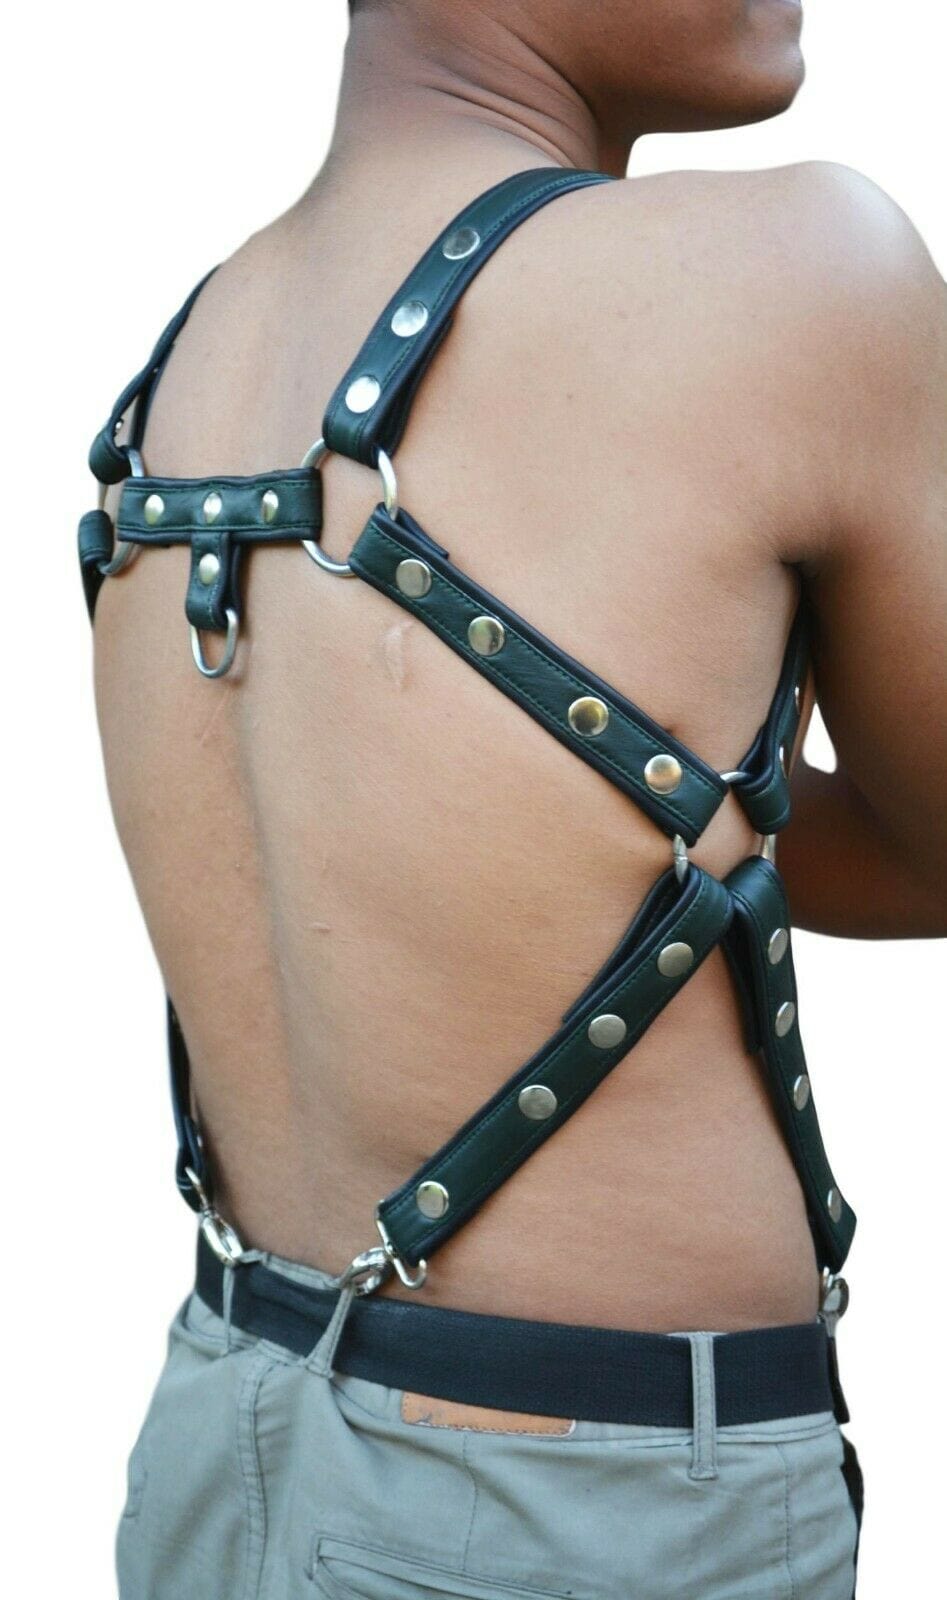 Mens Harness With Buckles Black Leather Male Clothing Bondage